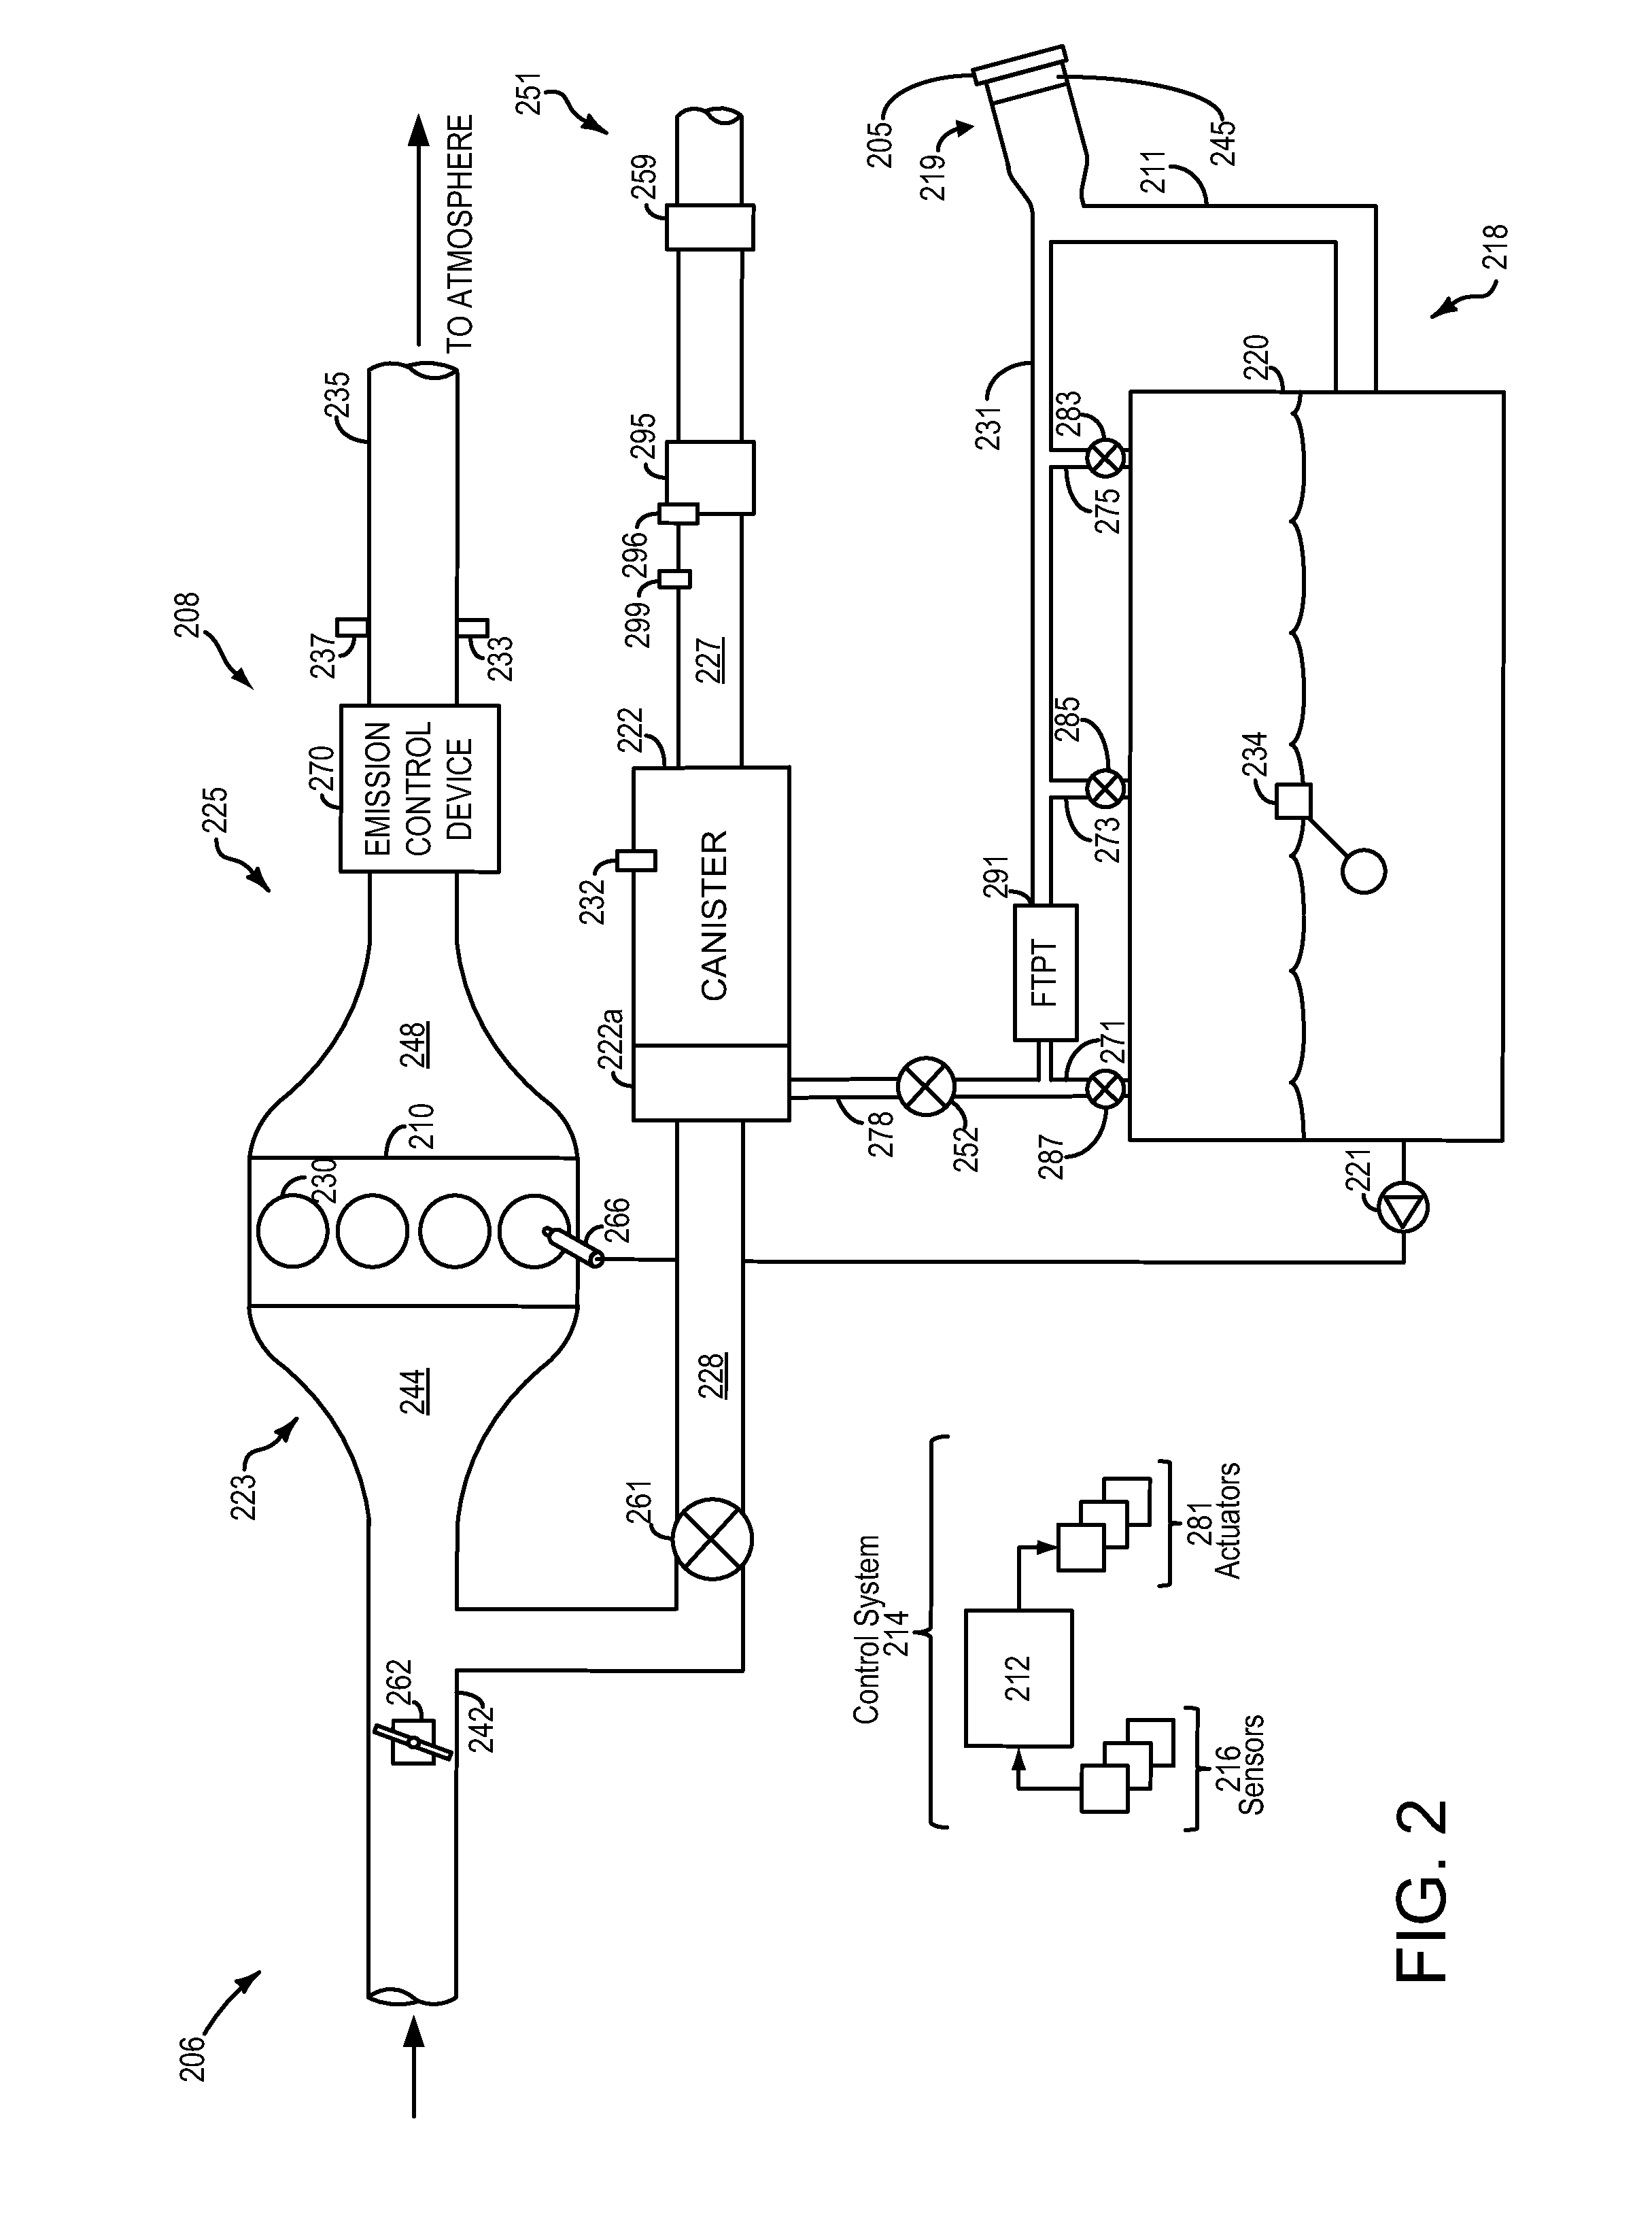 Systems and methods for reducing bleed emissions